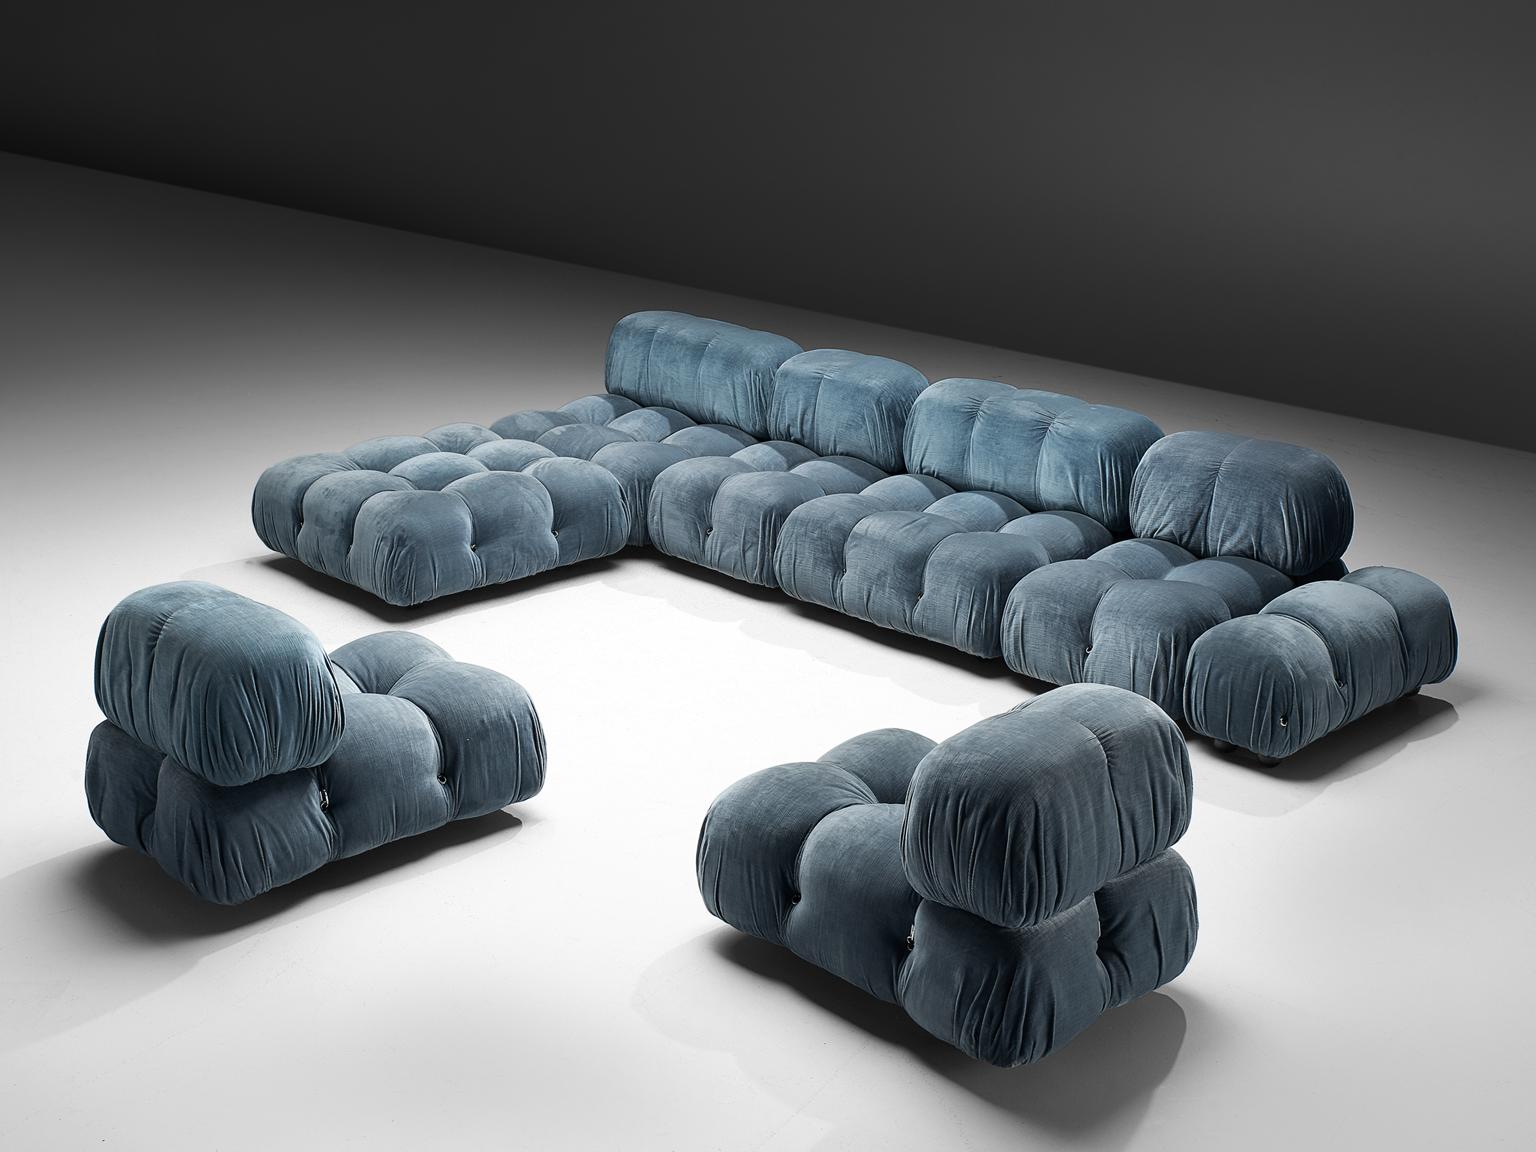 Mario Bellini, large modular 'Cameleonda' sofa in blue velvet, Italy 1972.

The sectional elements of this sofa can be used freely and apart from one another. The upholstery on this piece features a sea blue velvet. The backs and armrests are